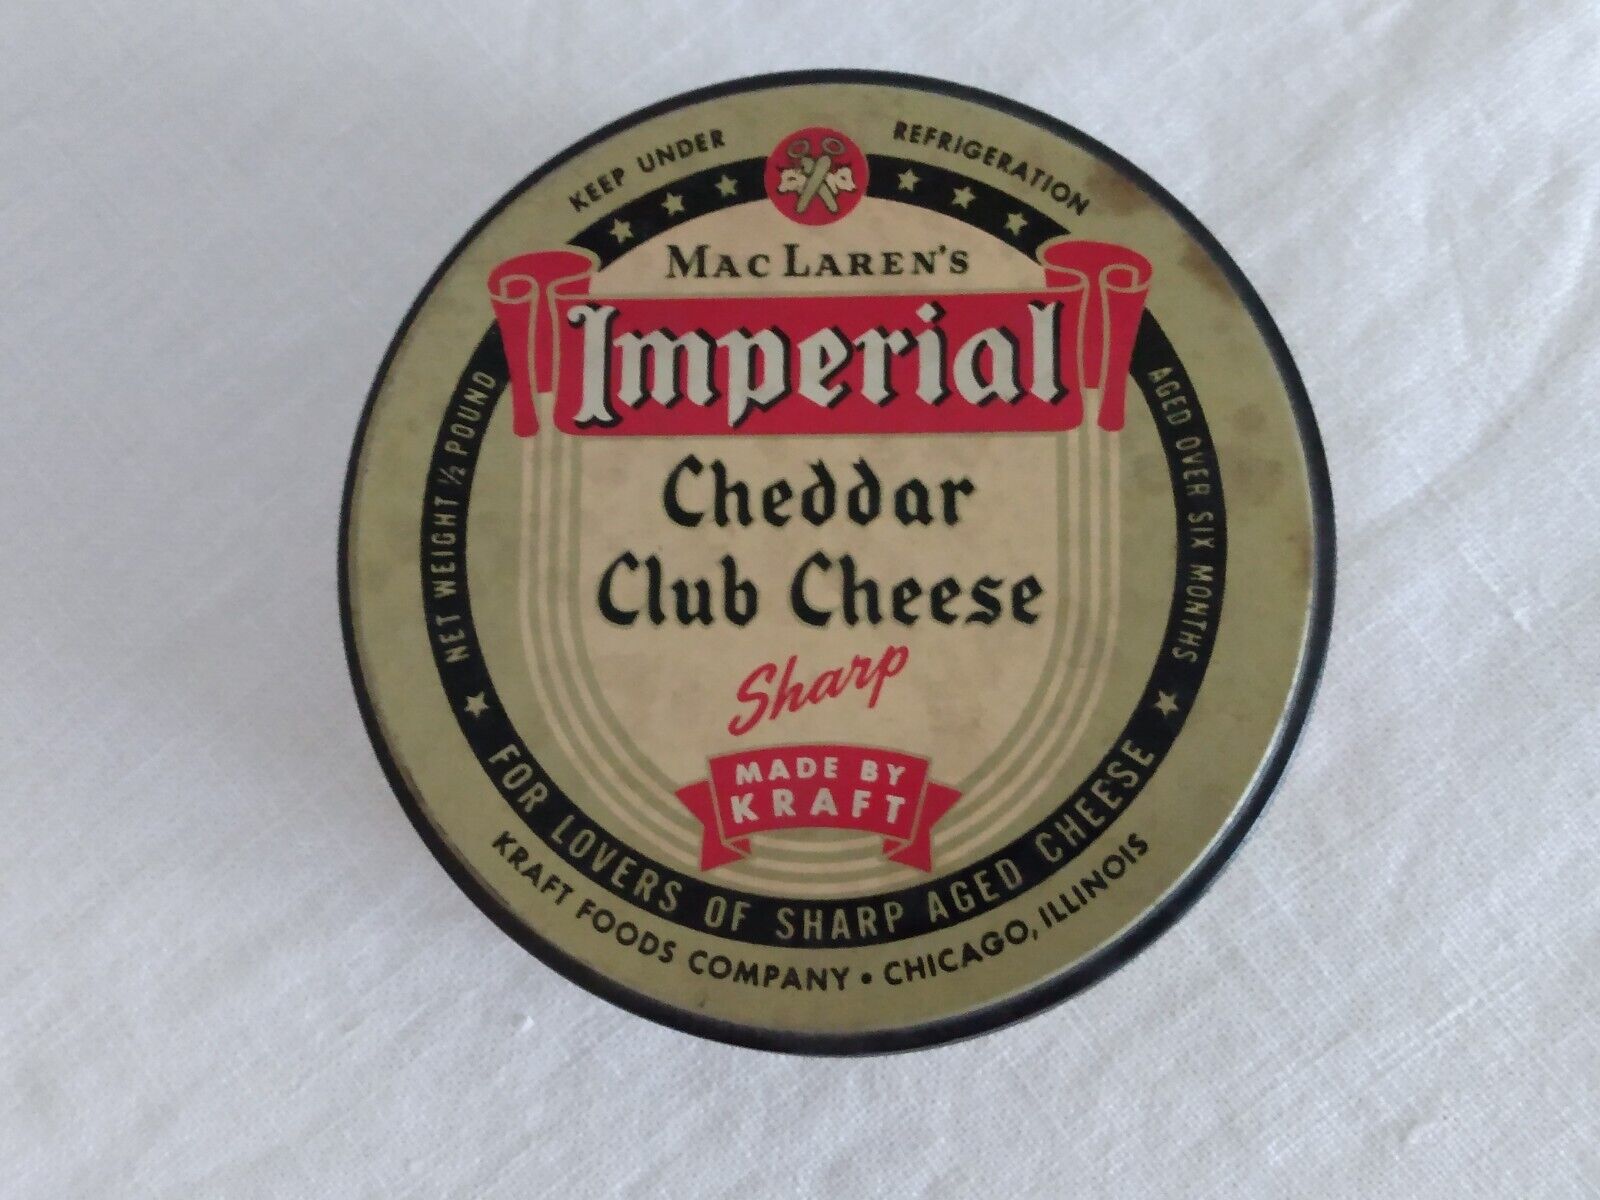 VTG TIN KRAFT MacLAREN'S IMPERIAL Cheddar Club Cheese Container